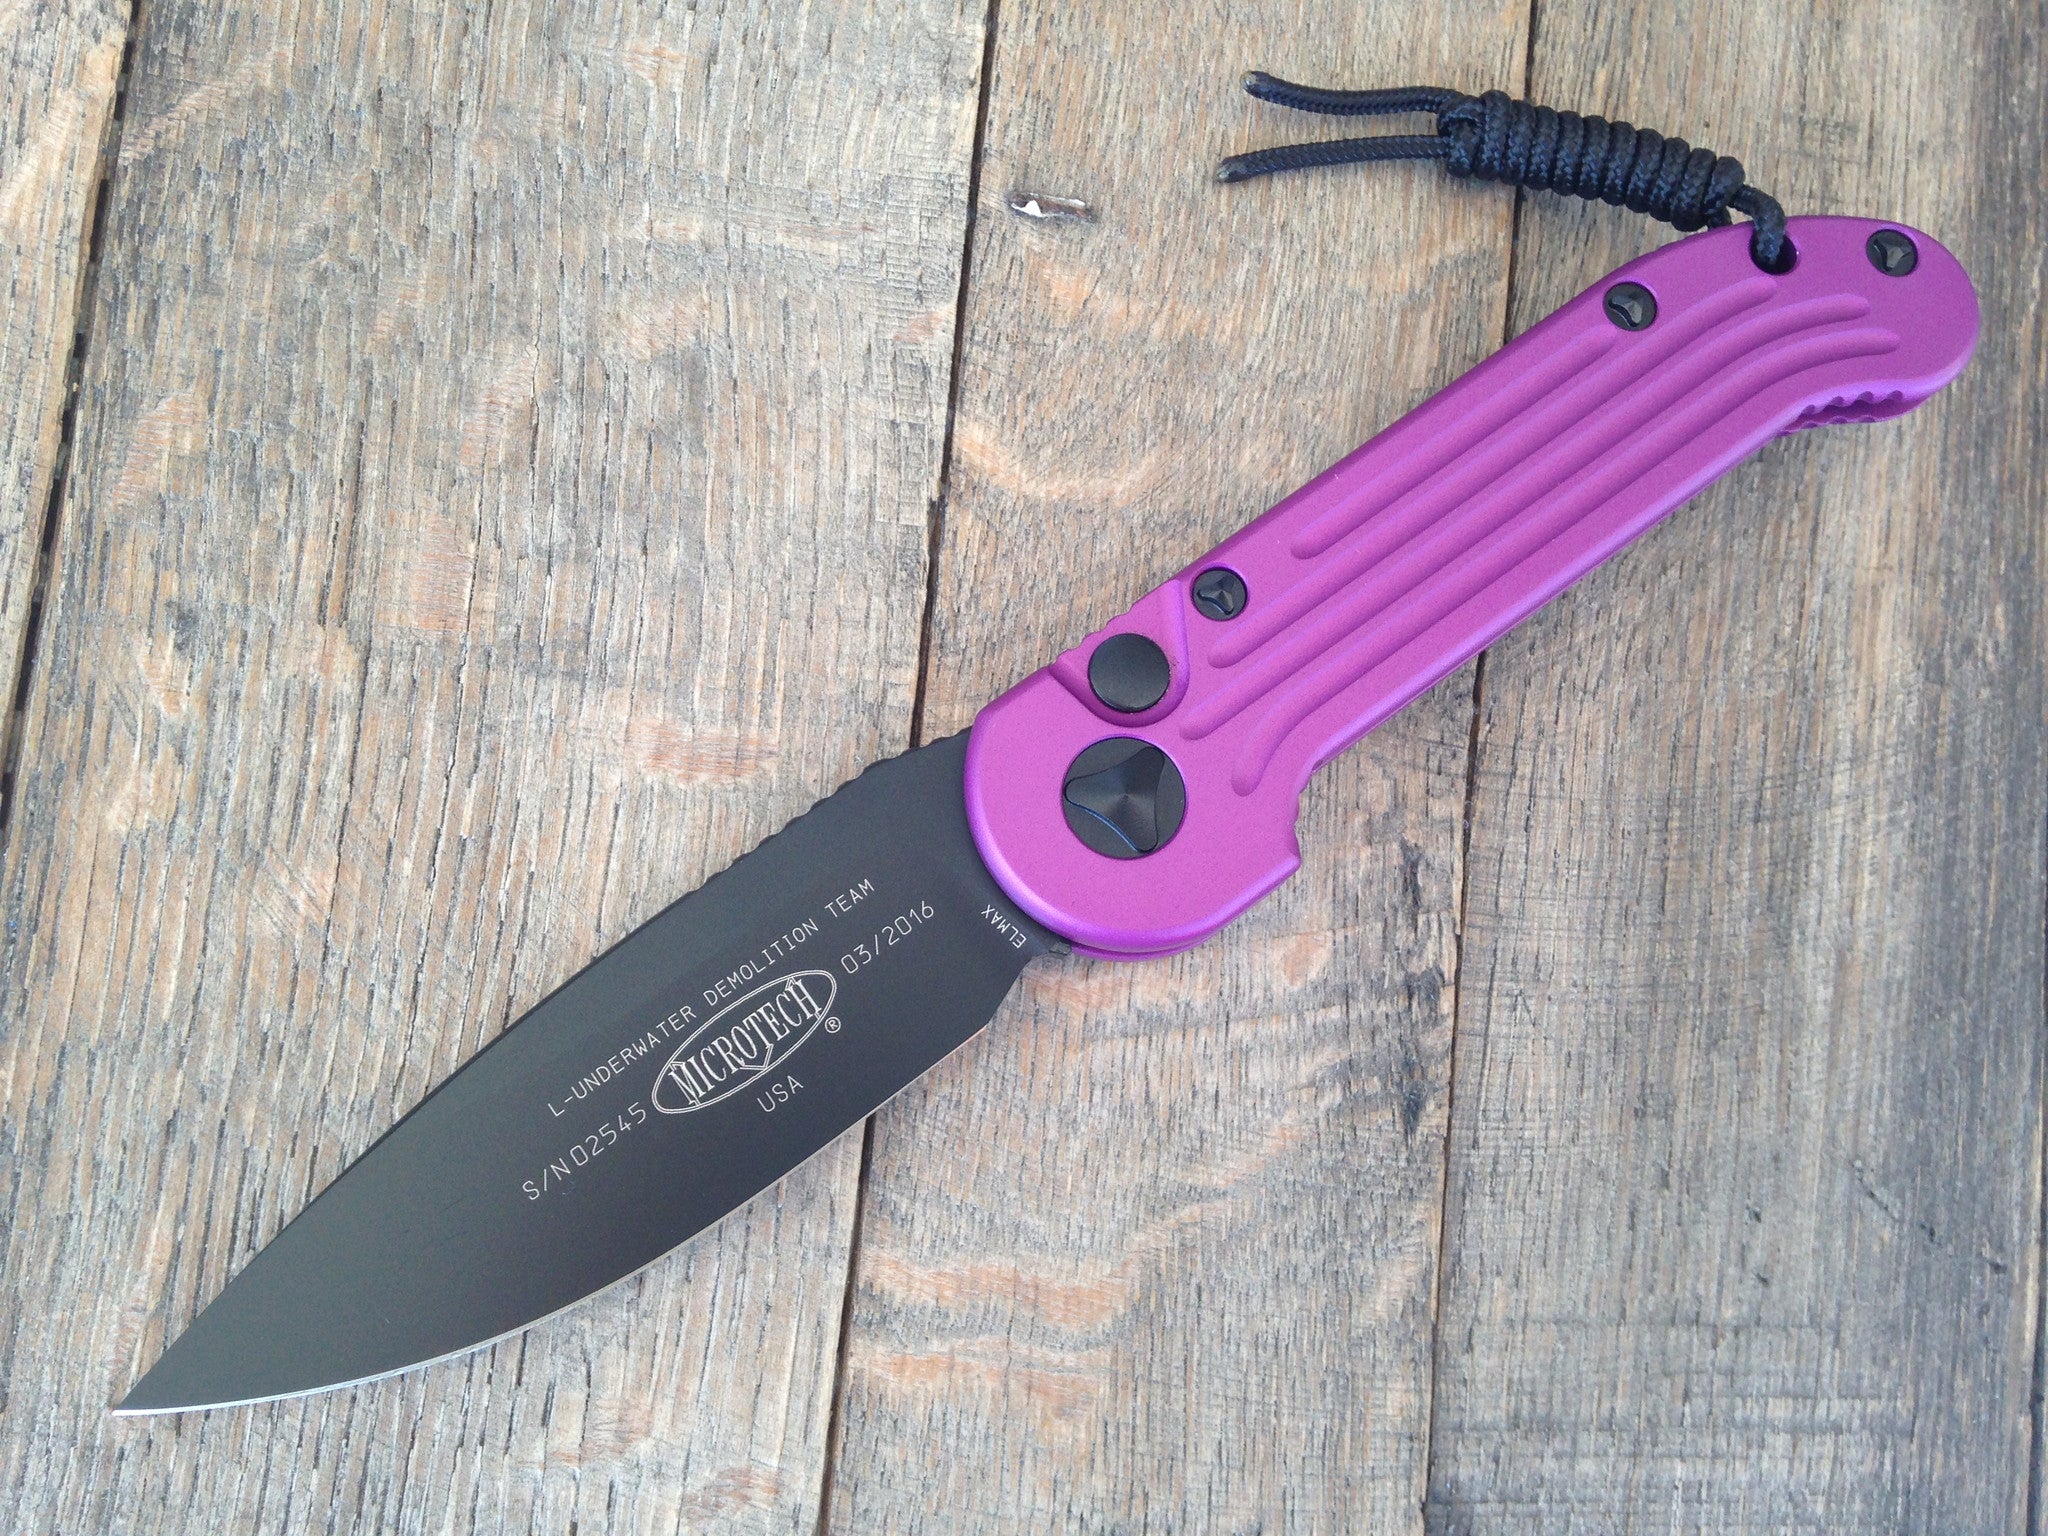 Microtech LUDT Tactical Automatic Knife (3.4" Violet) 135-1VI - GearBarrel.com